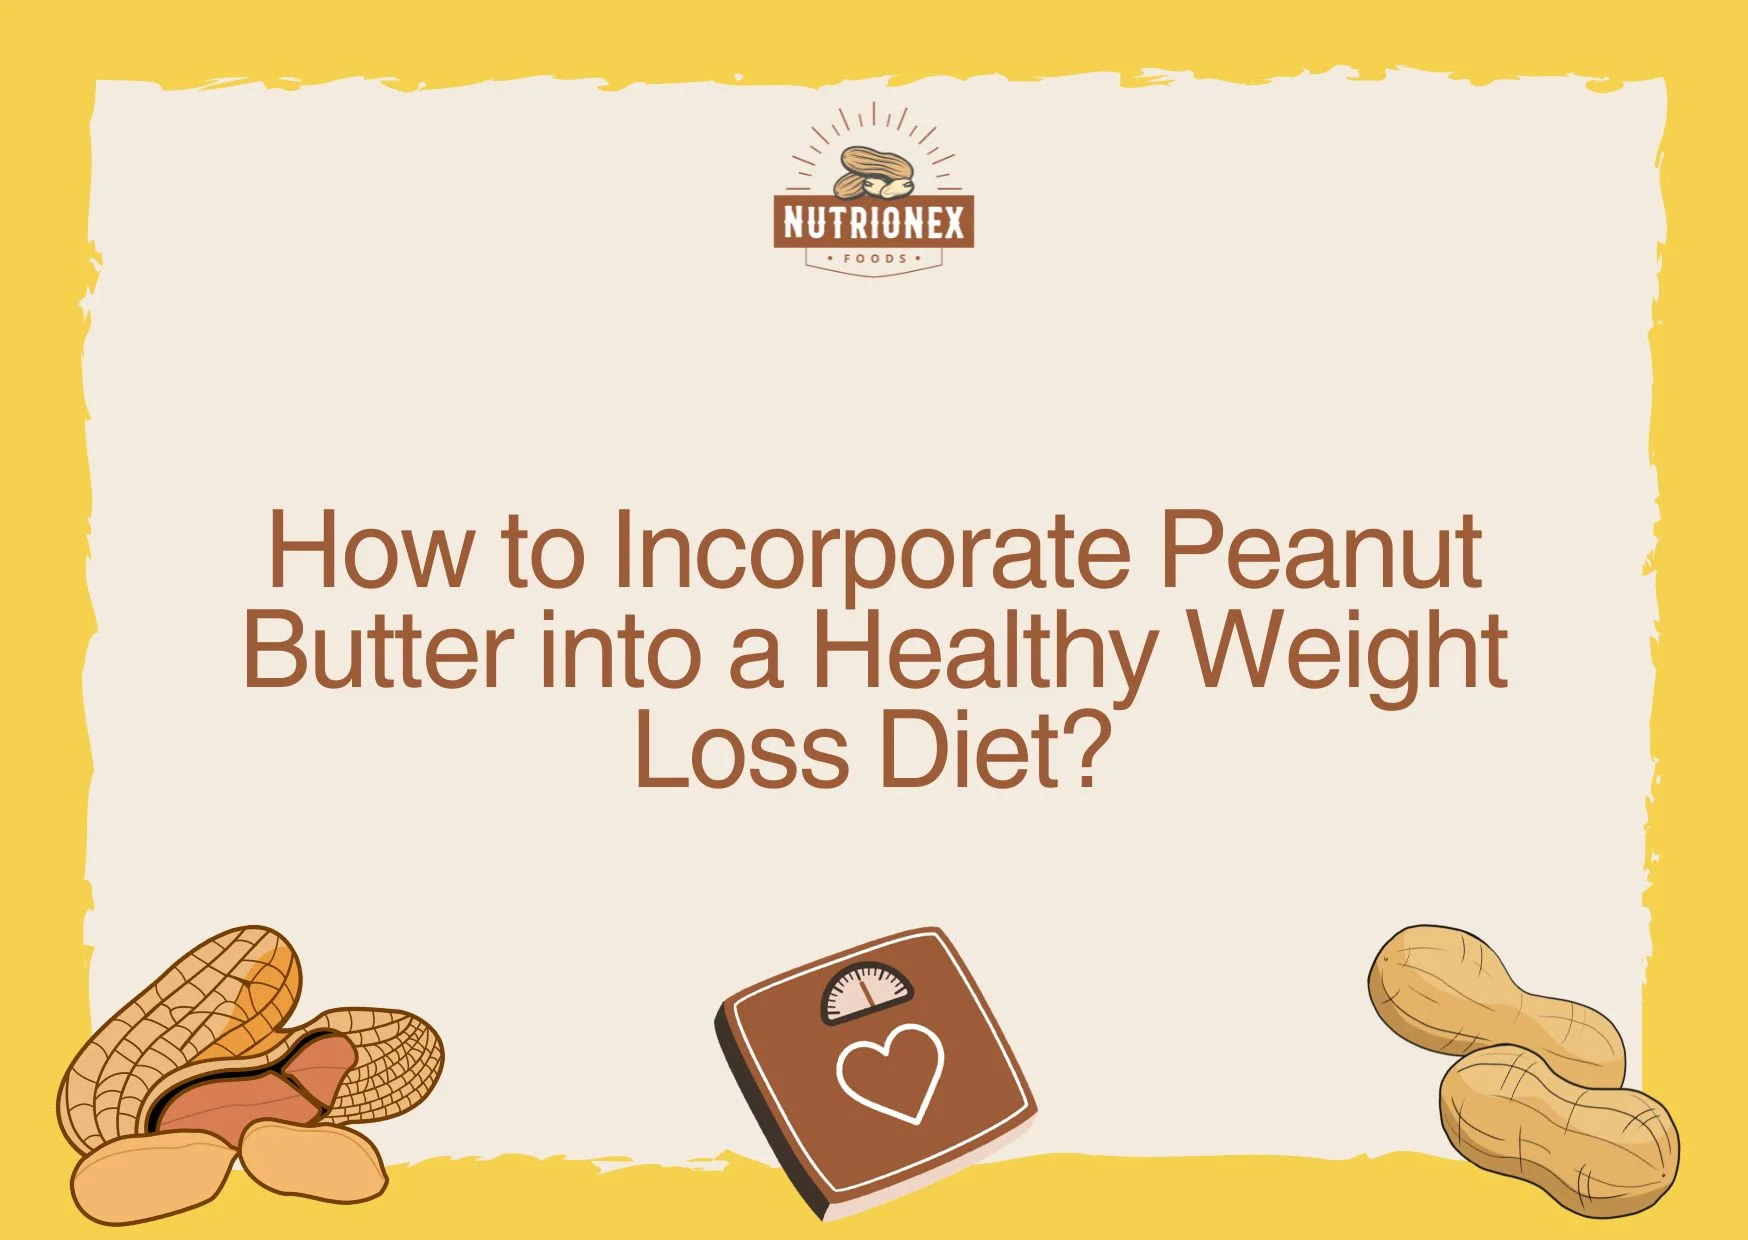  How To Incorporate Peanut Butter Into A Healthy Weight Loss Diet 